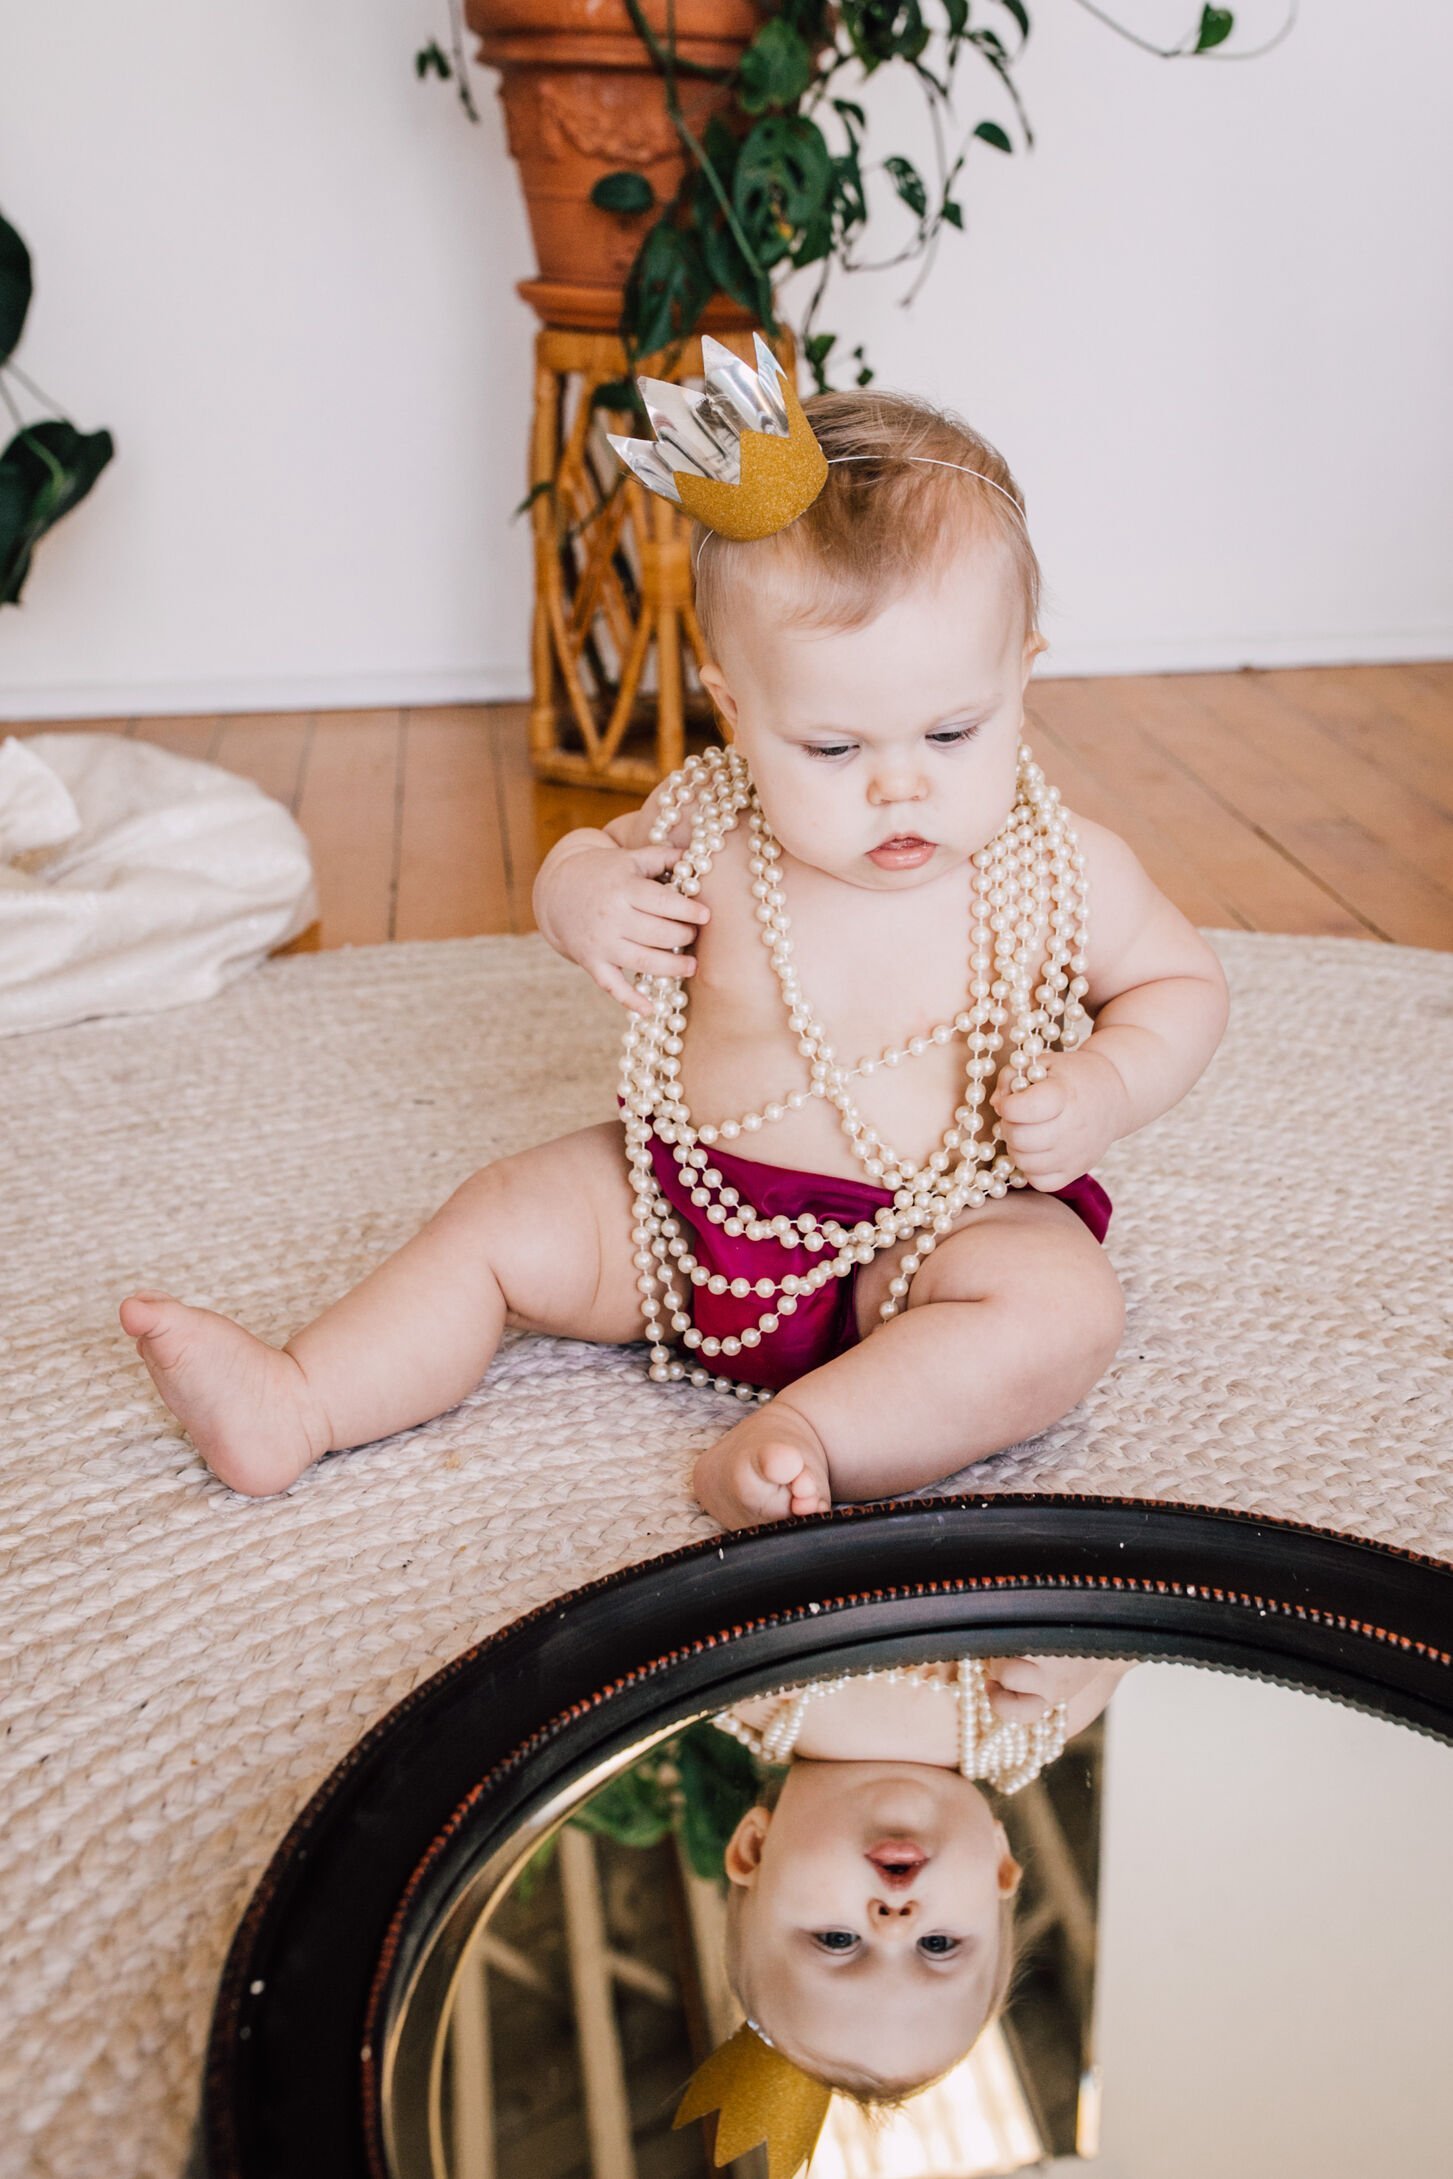  Baby girl wearing pearls and a paper crown looks into a mirror during this moody mommy and me session&nbsp; 